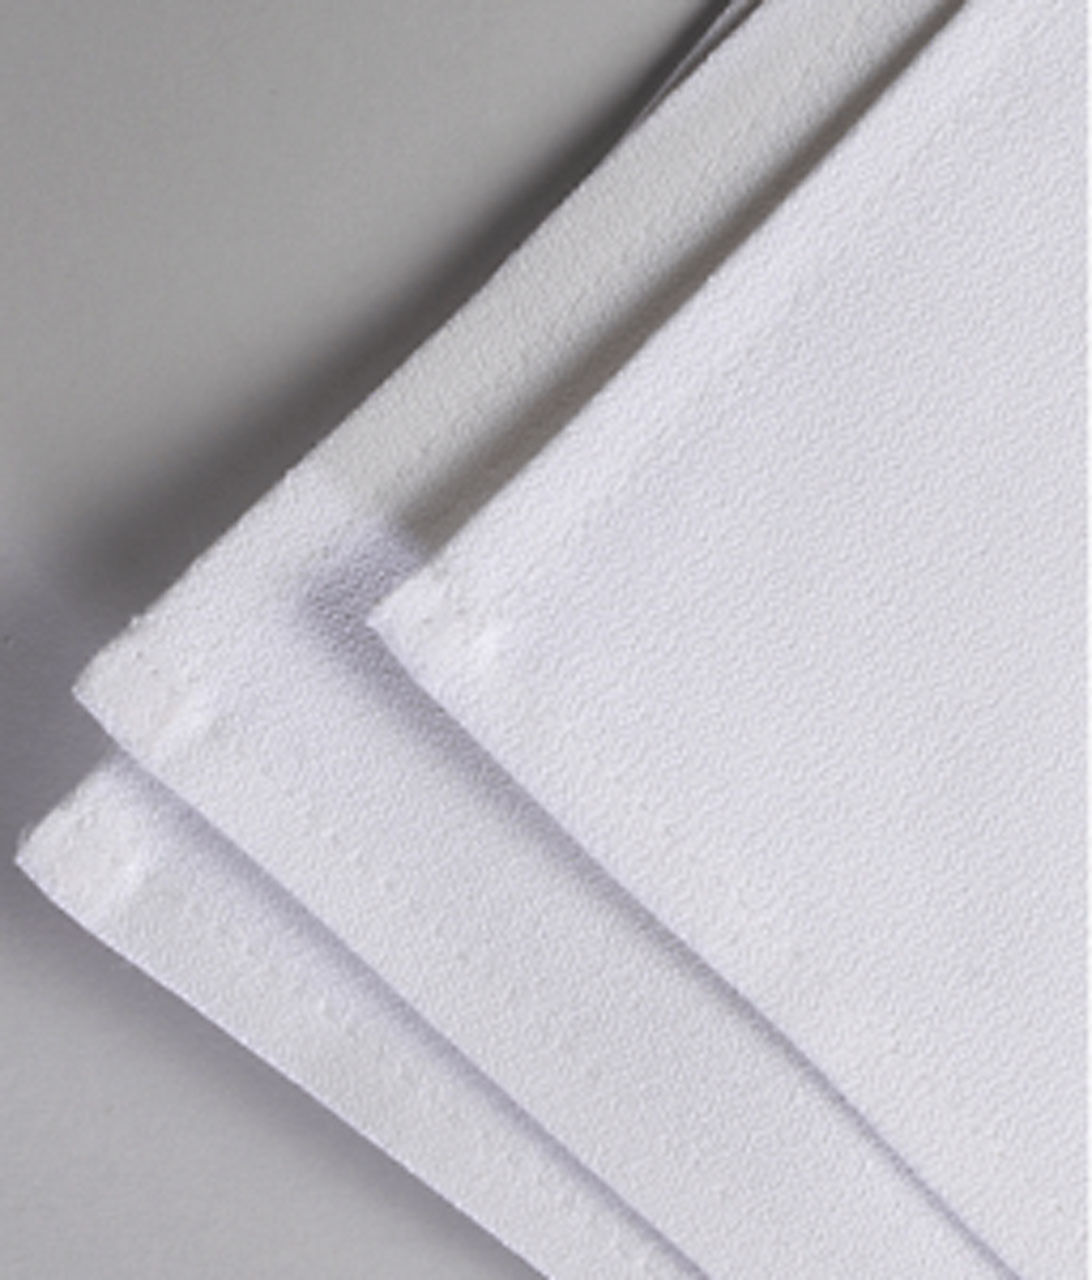 What is the material composition of Cotton Momie Square Table Linens?